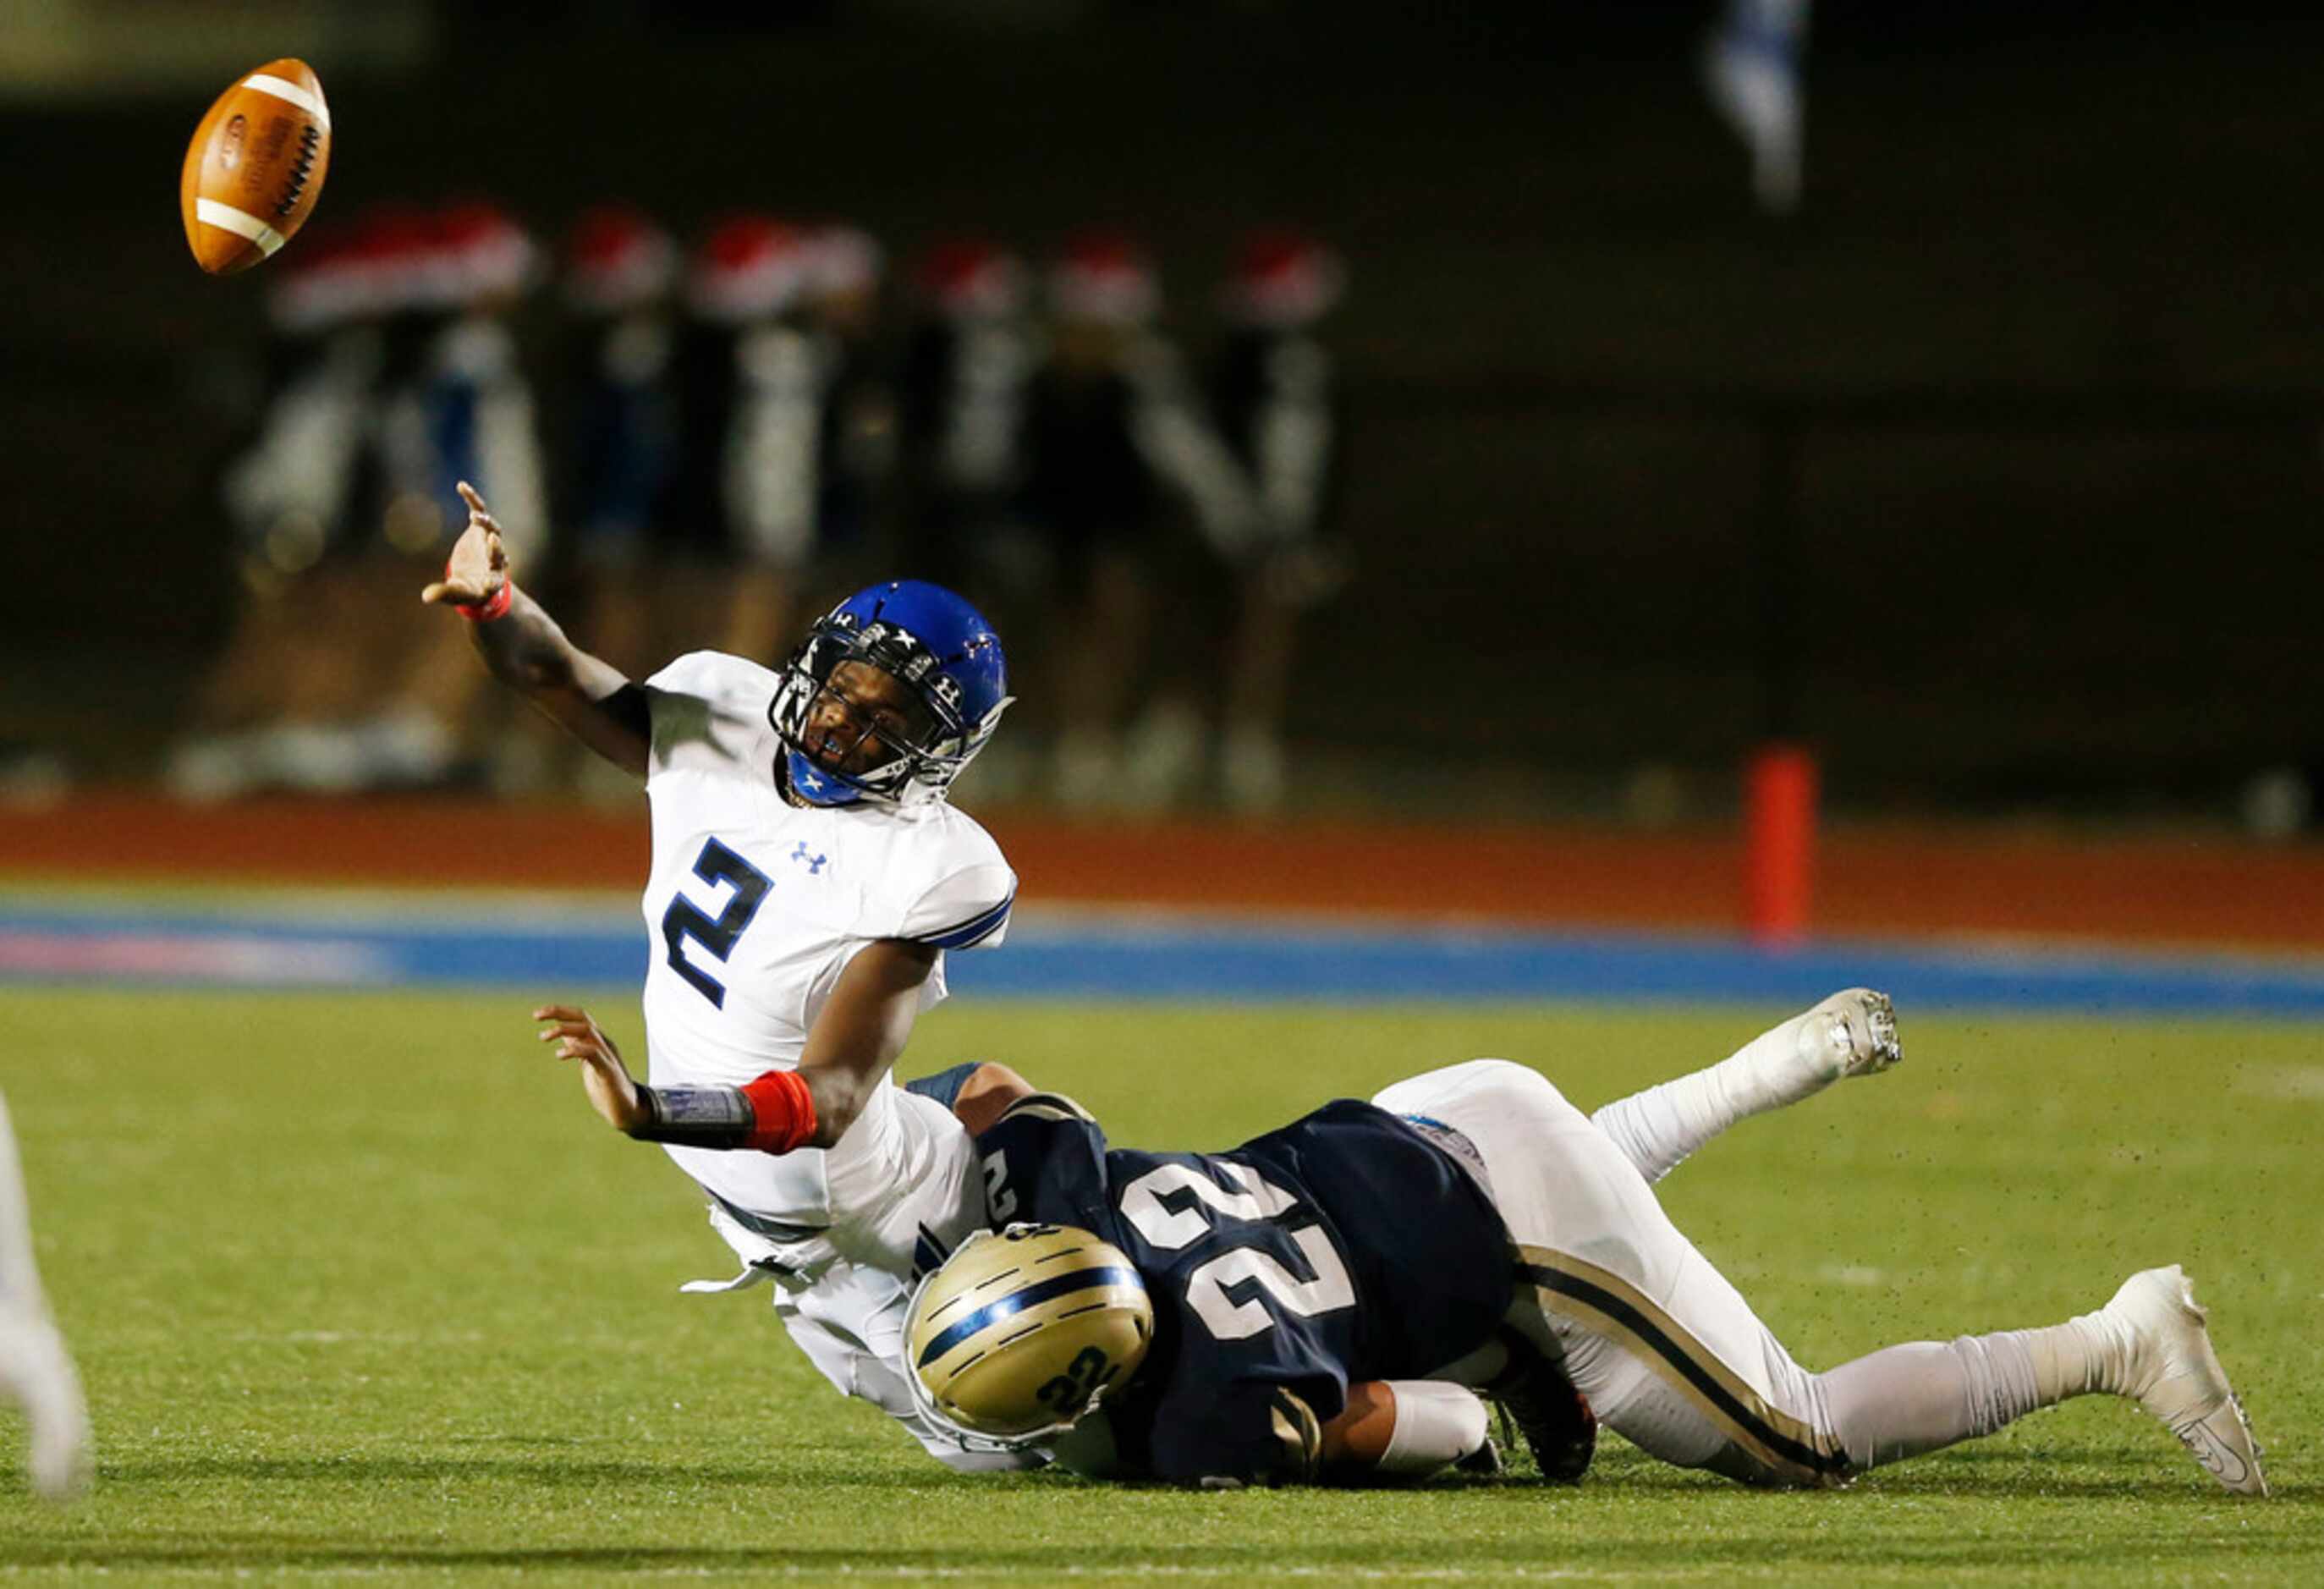 Trinity Christian's Shedeur Sanders (2) gets rid of the ball as Austin Regents Thomas Scully...